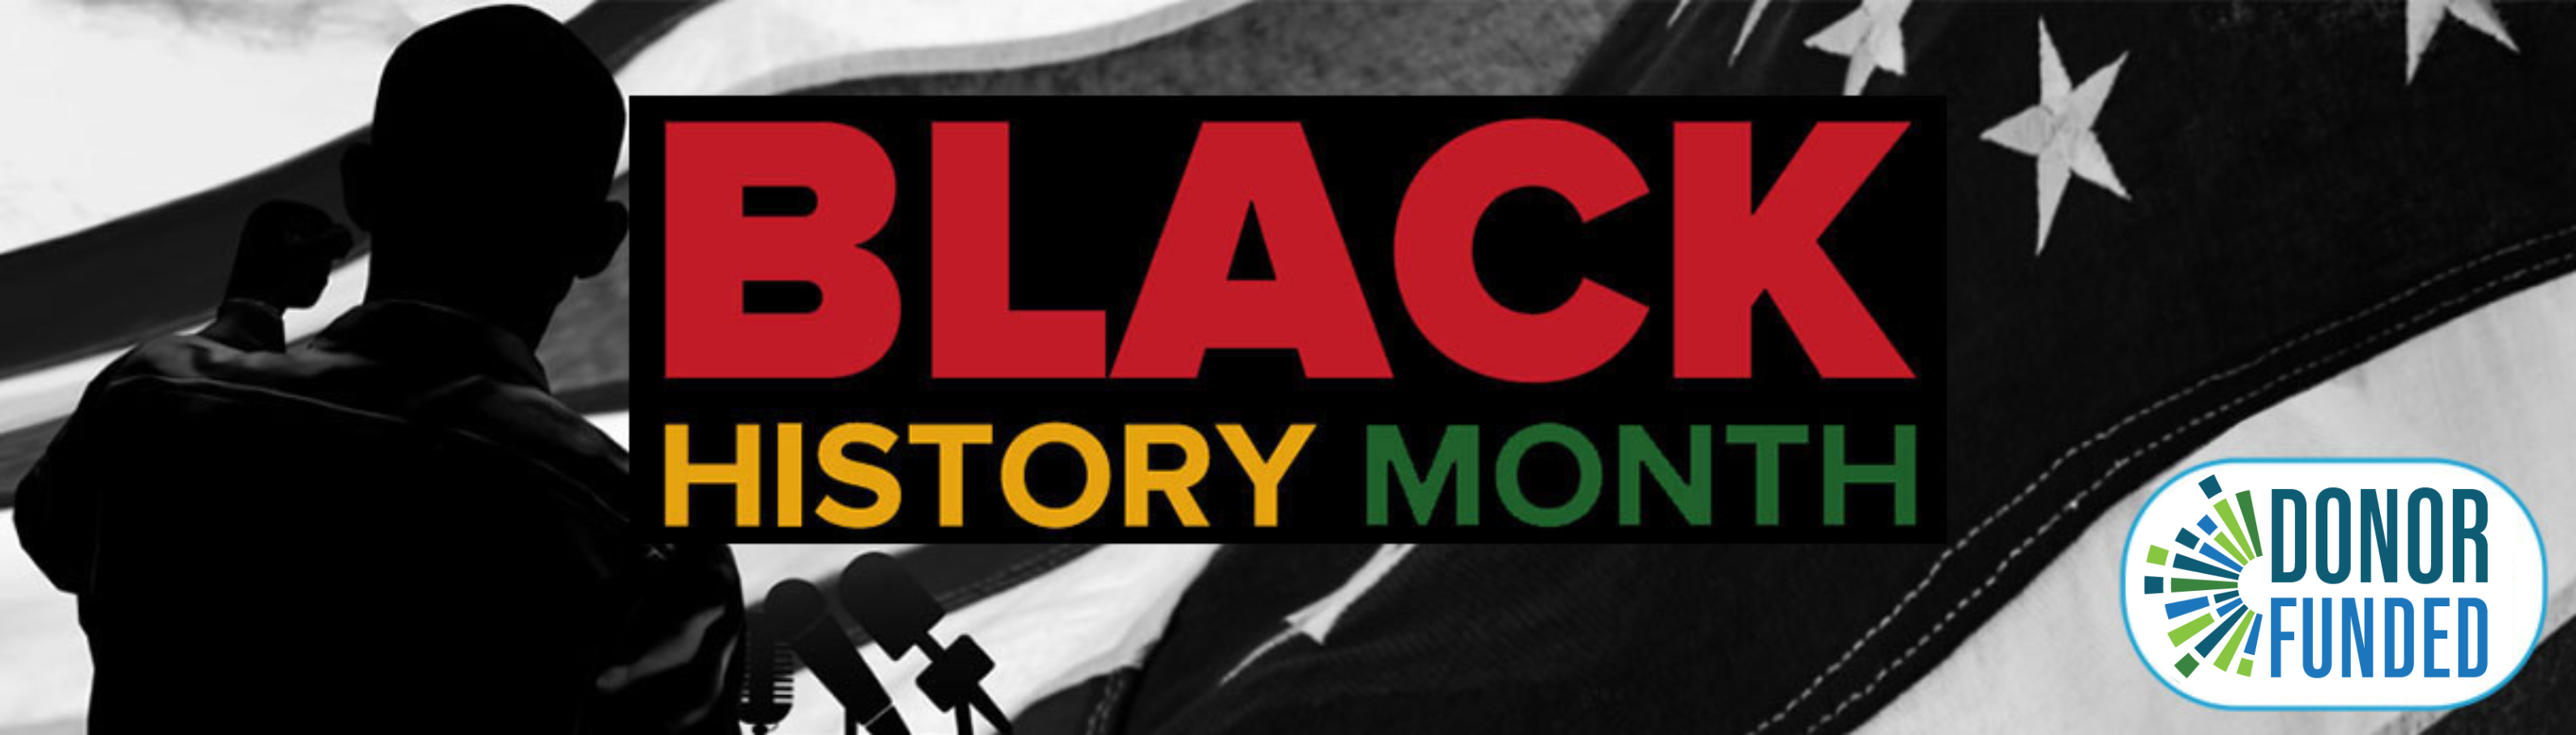 Black History Month - Donor Funded